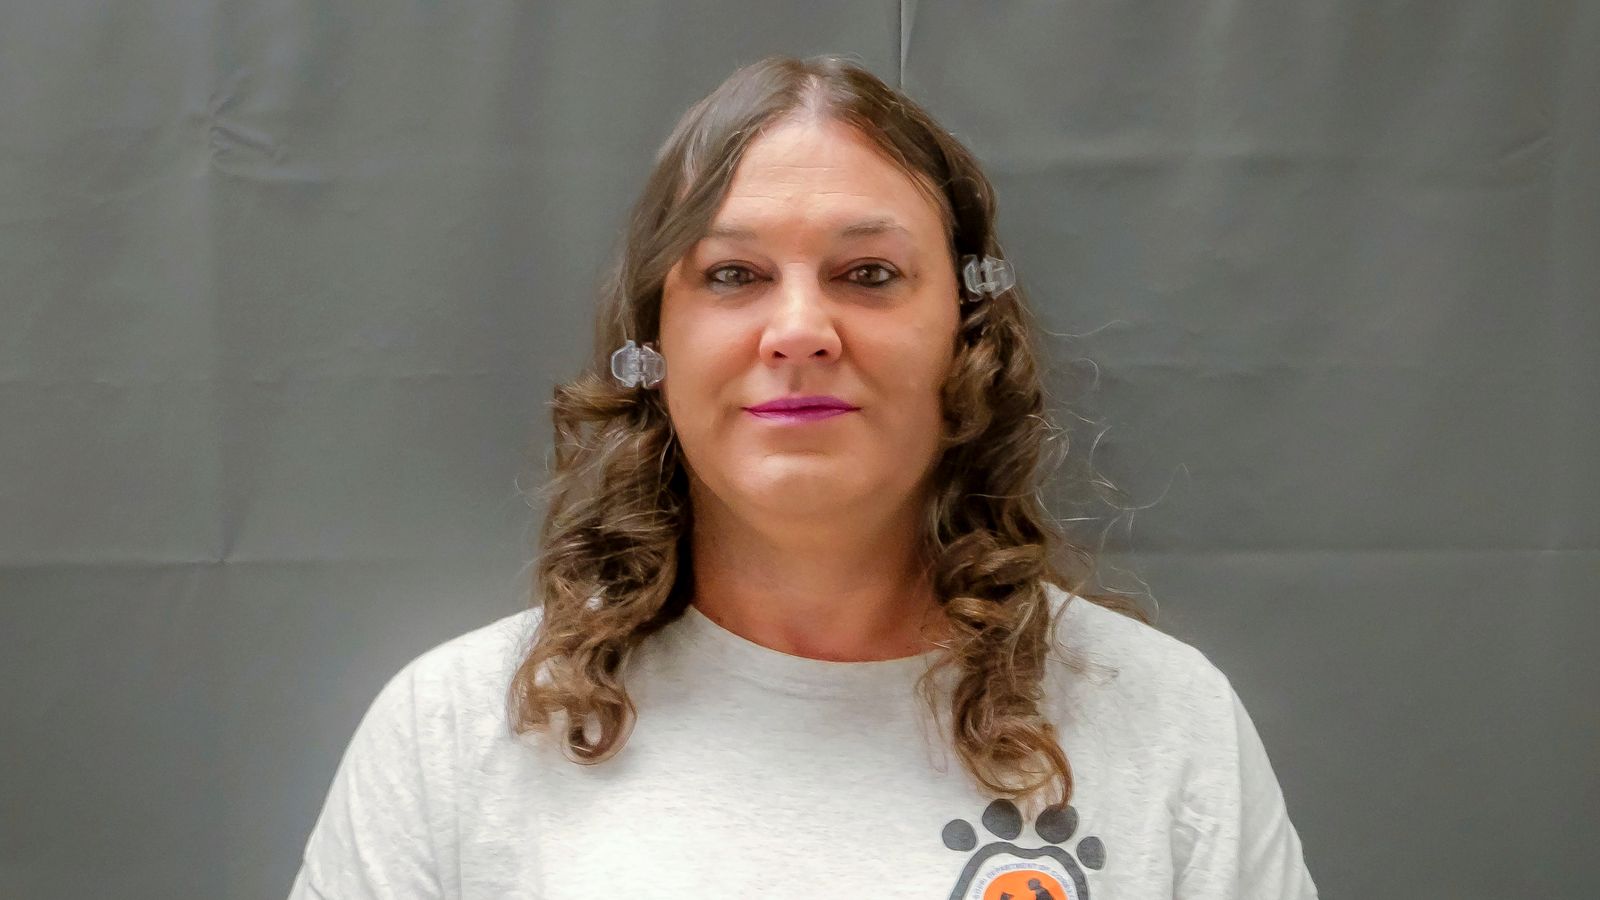 Openly transgender woman set to be executed for the first time in US history